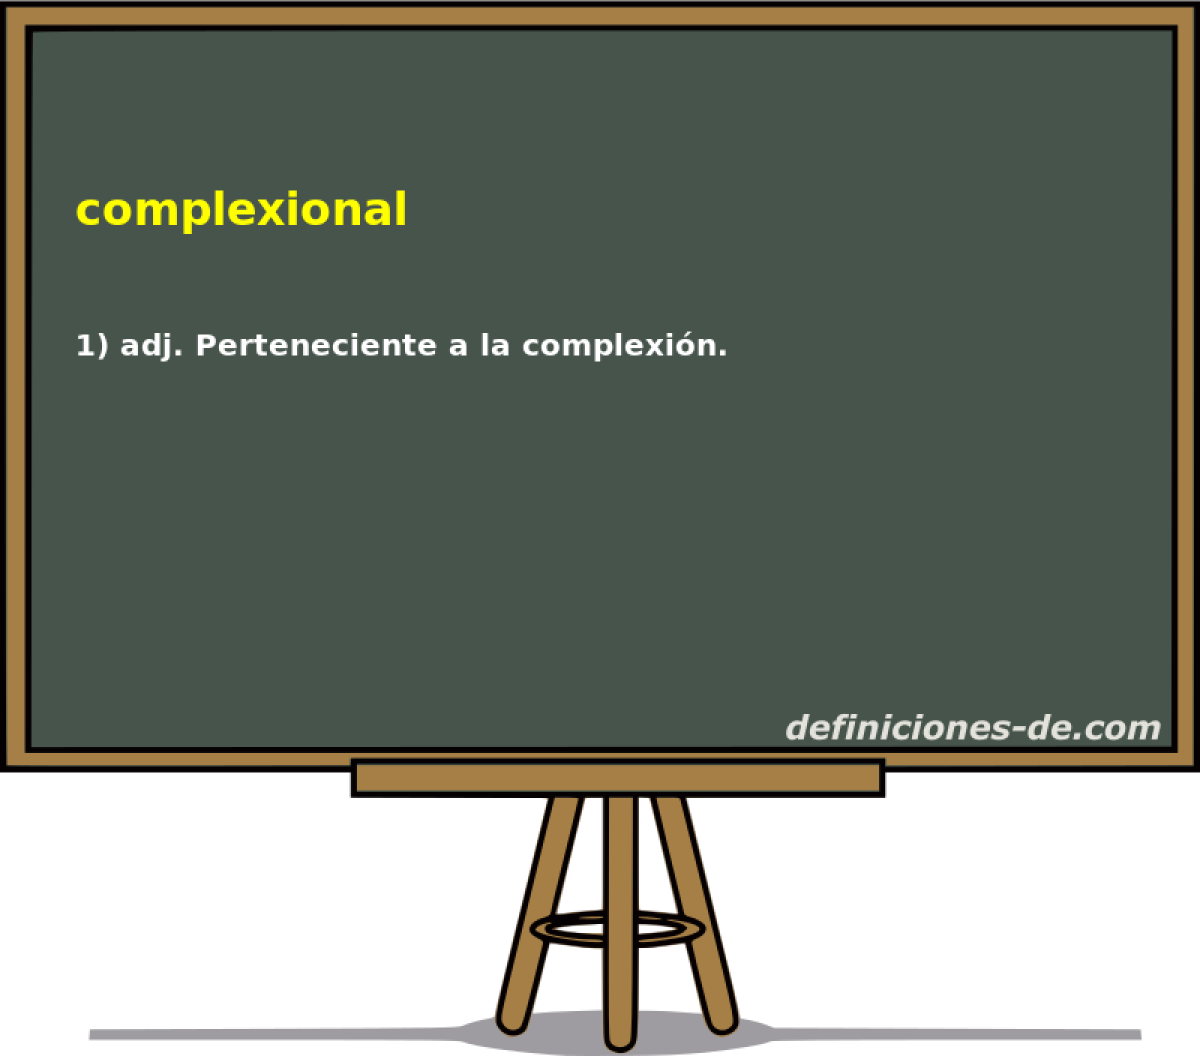 complexional 